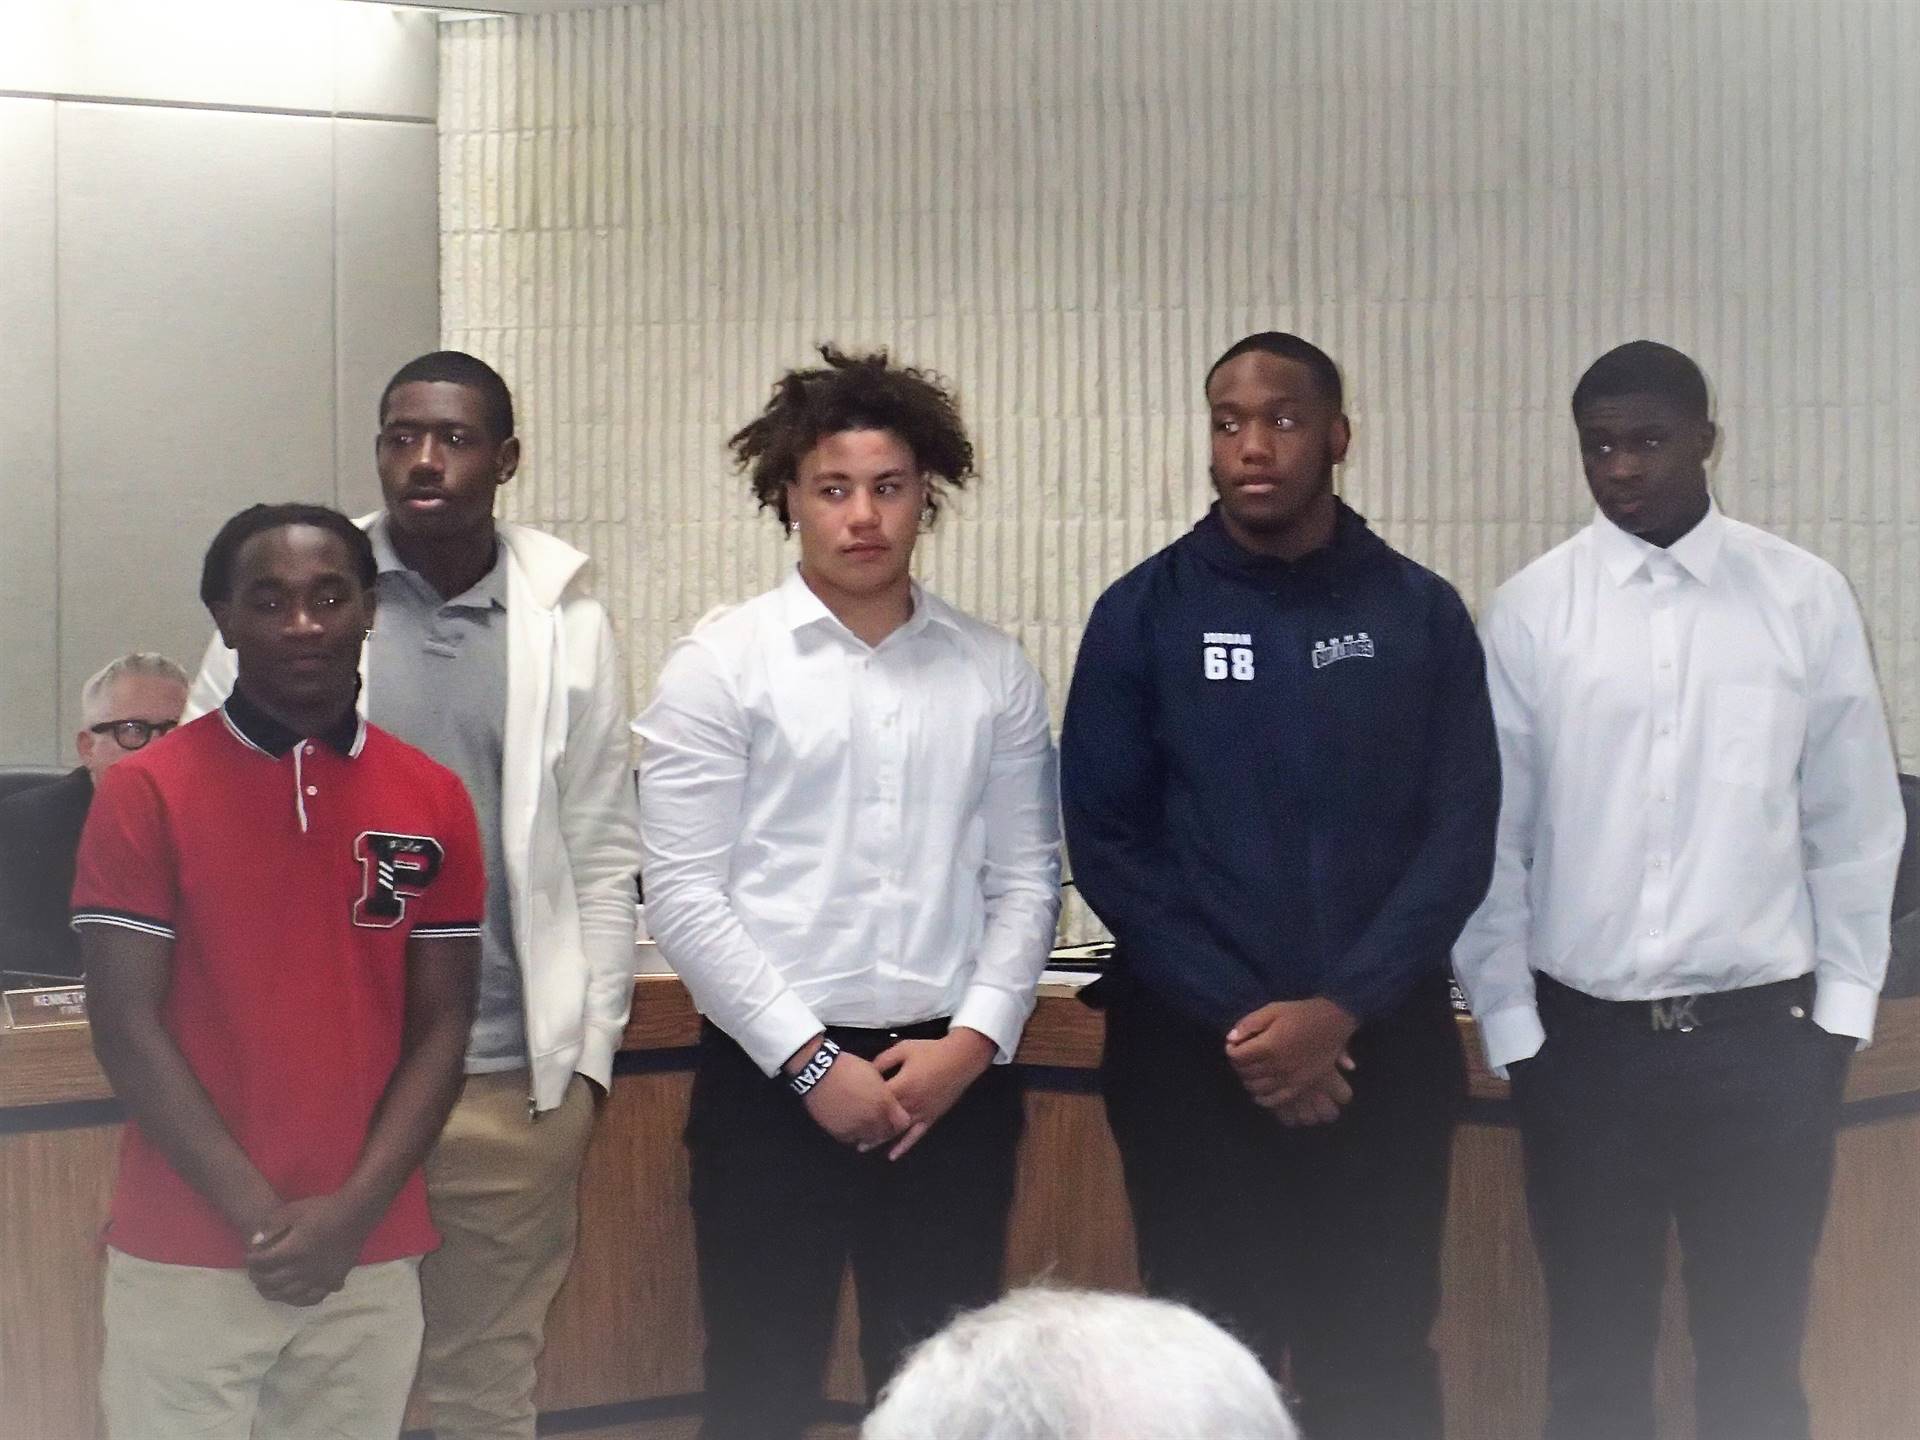 City Council Recognition of FB Team